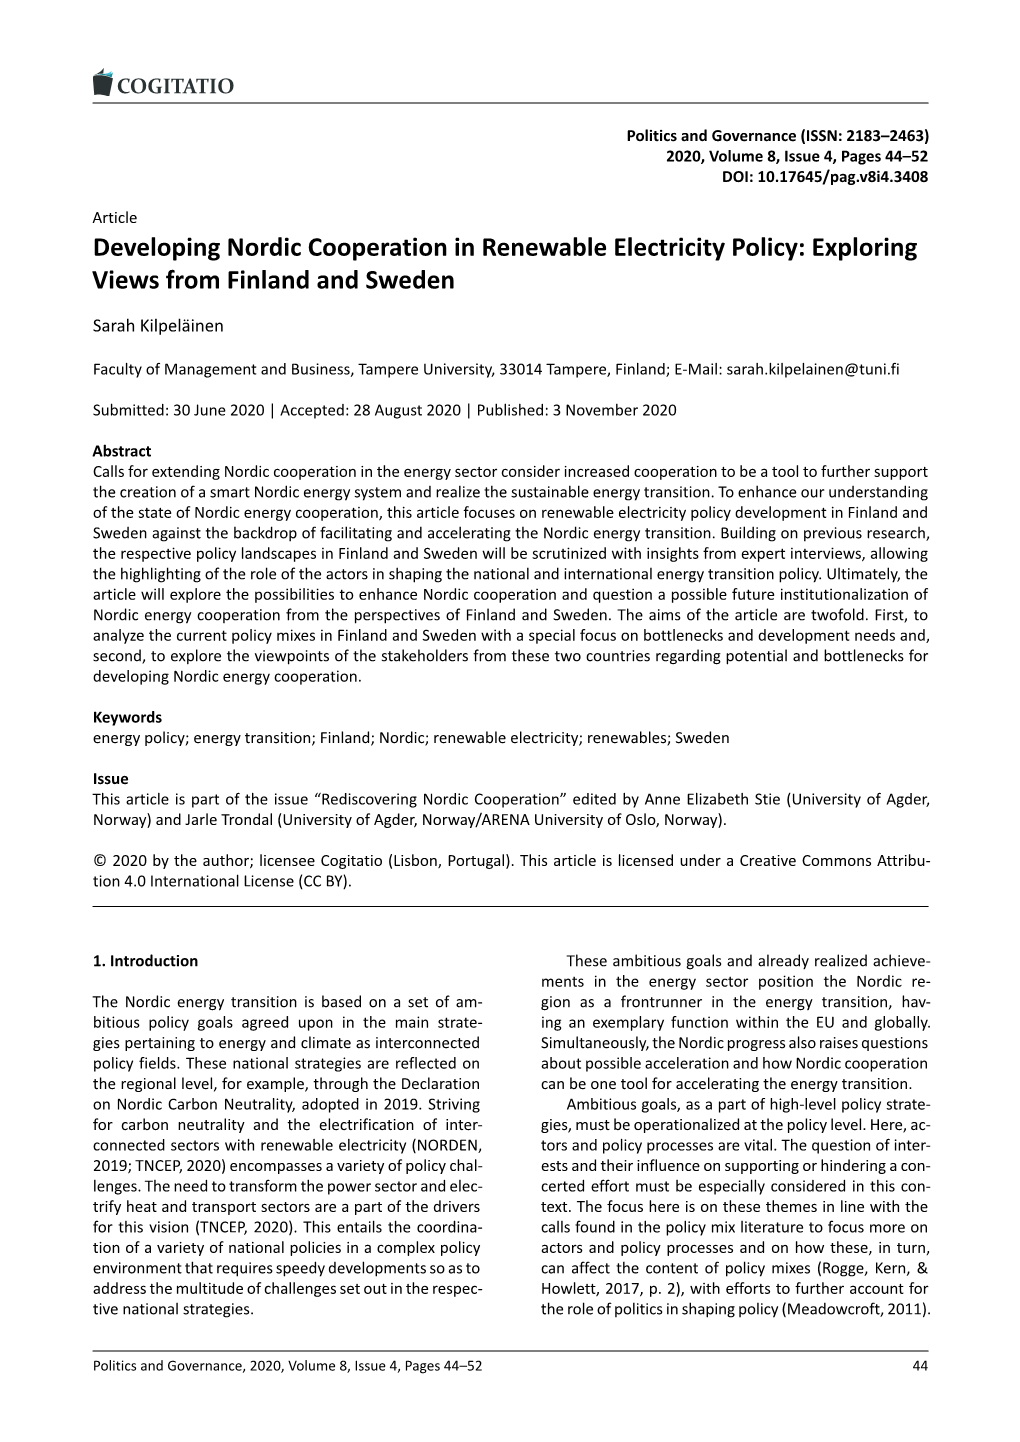 Developing Nordic Cooperation in Renewable Electricity Policy: Exploring Views from Finland and Sweden